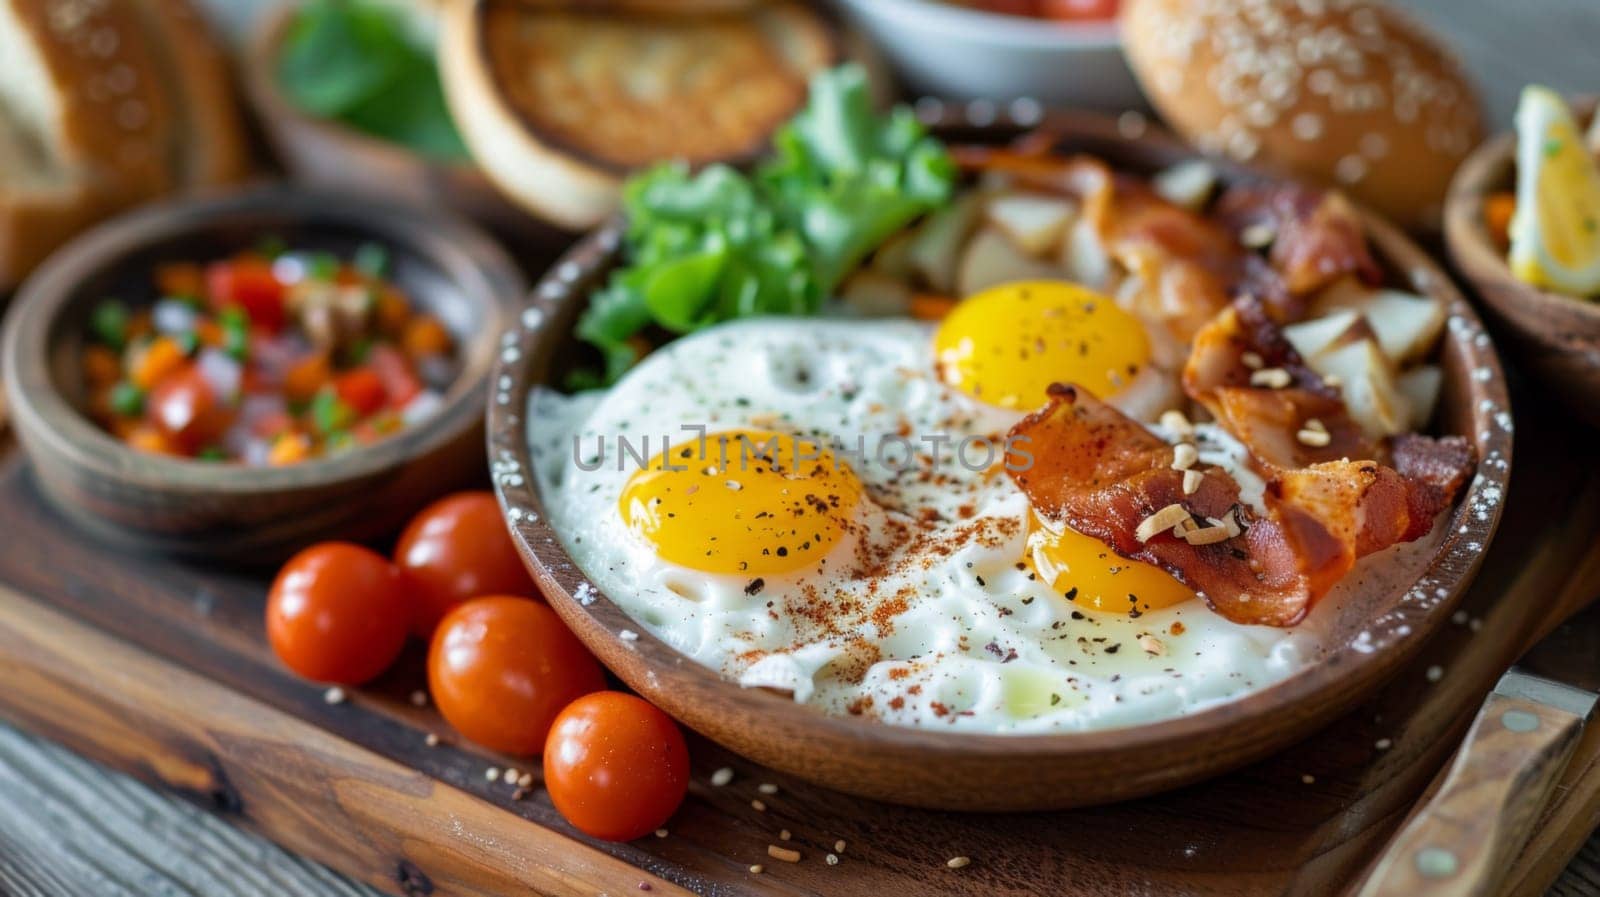 A wooden cutting board topped with a bowl of eggs, tomatoes and bacon